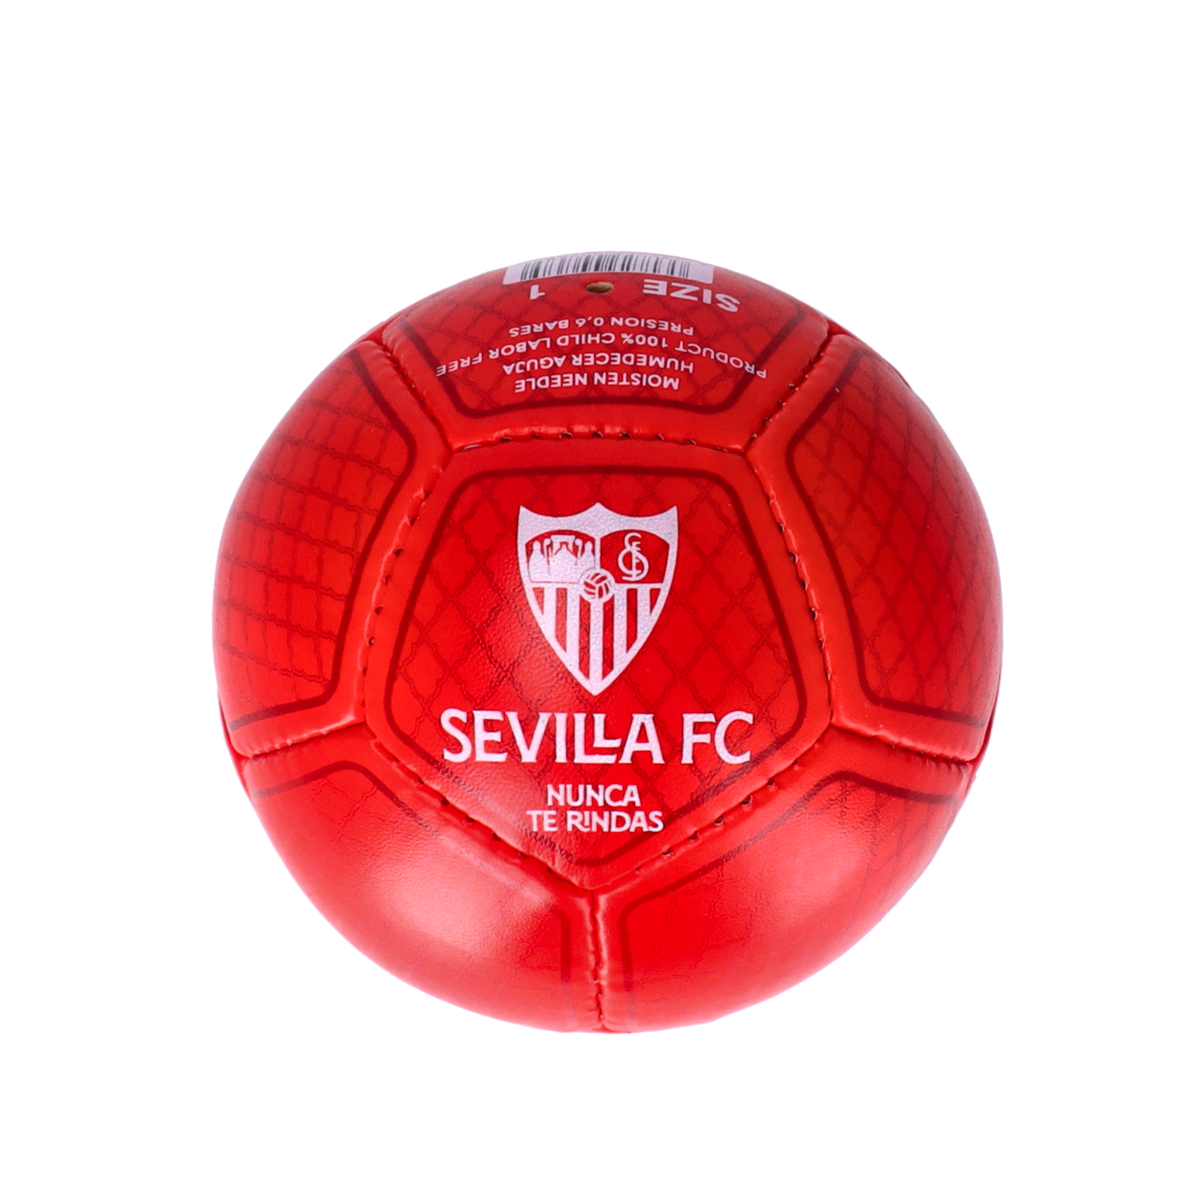 Red ball S1 23/24